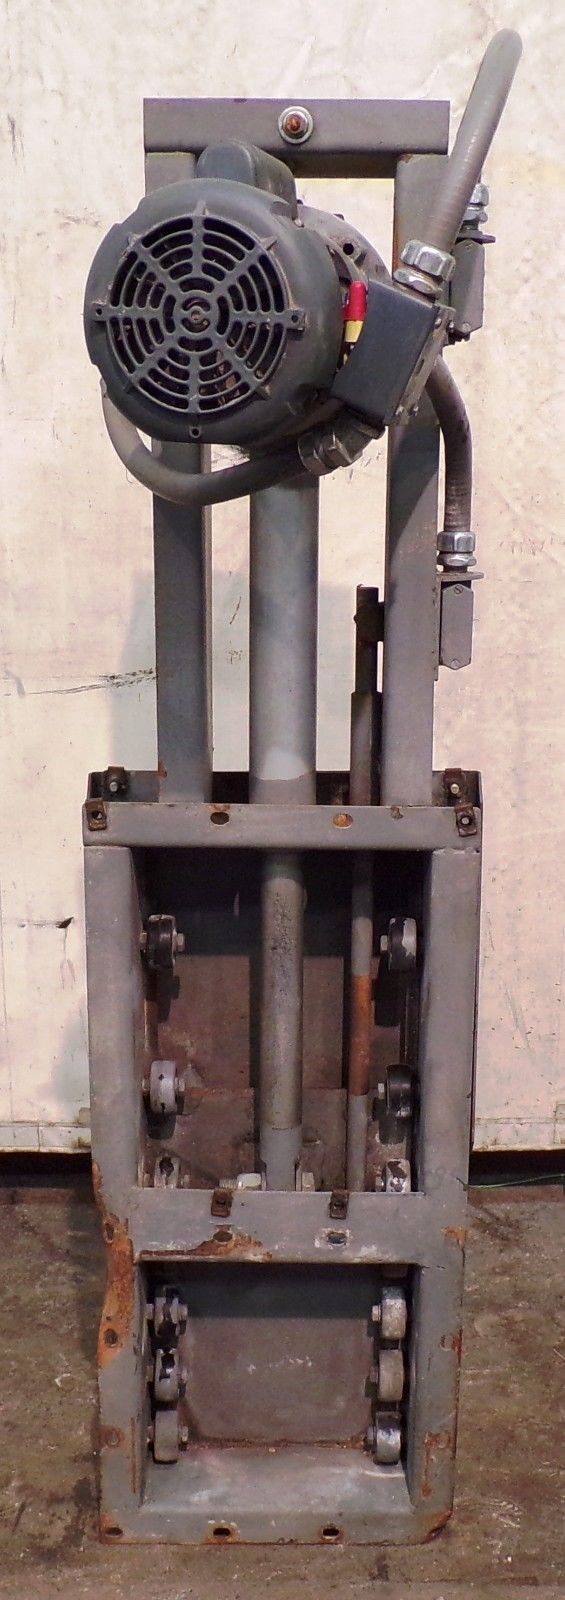 RACK AND PINION ELECTRIC SLIDE GATE, 10